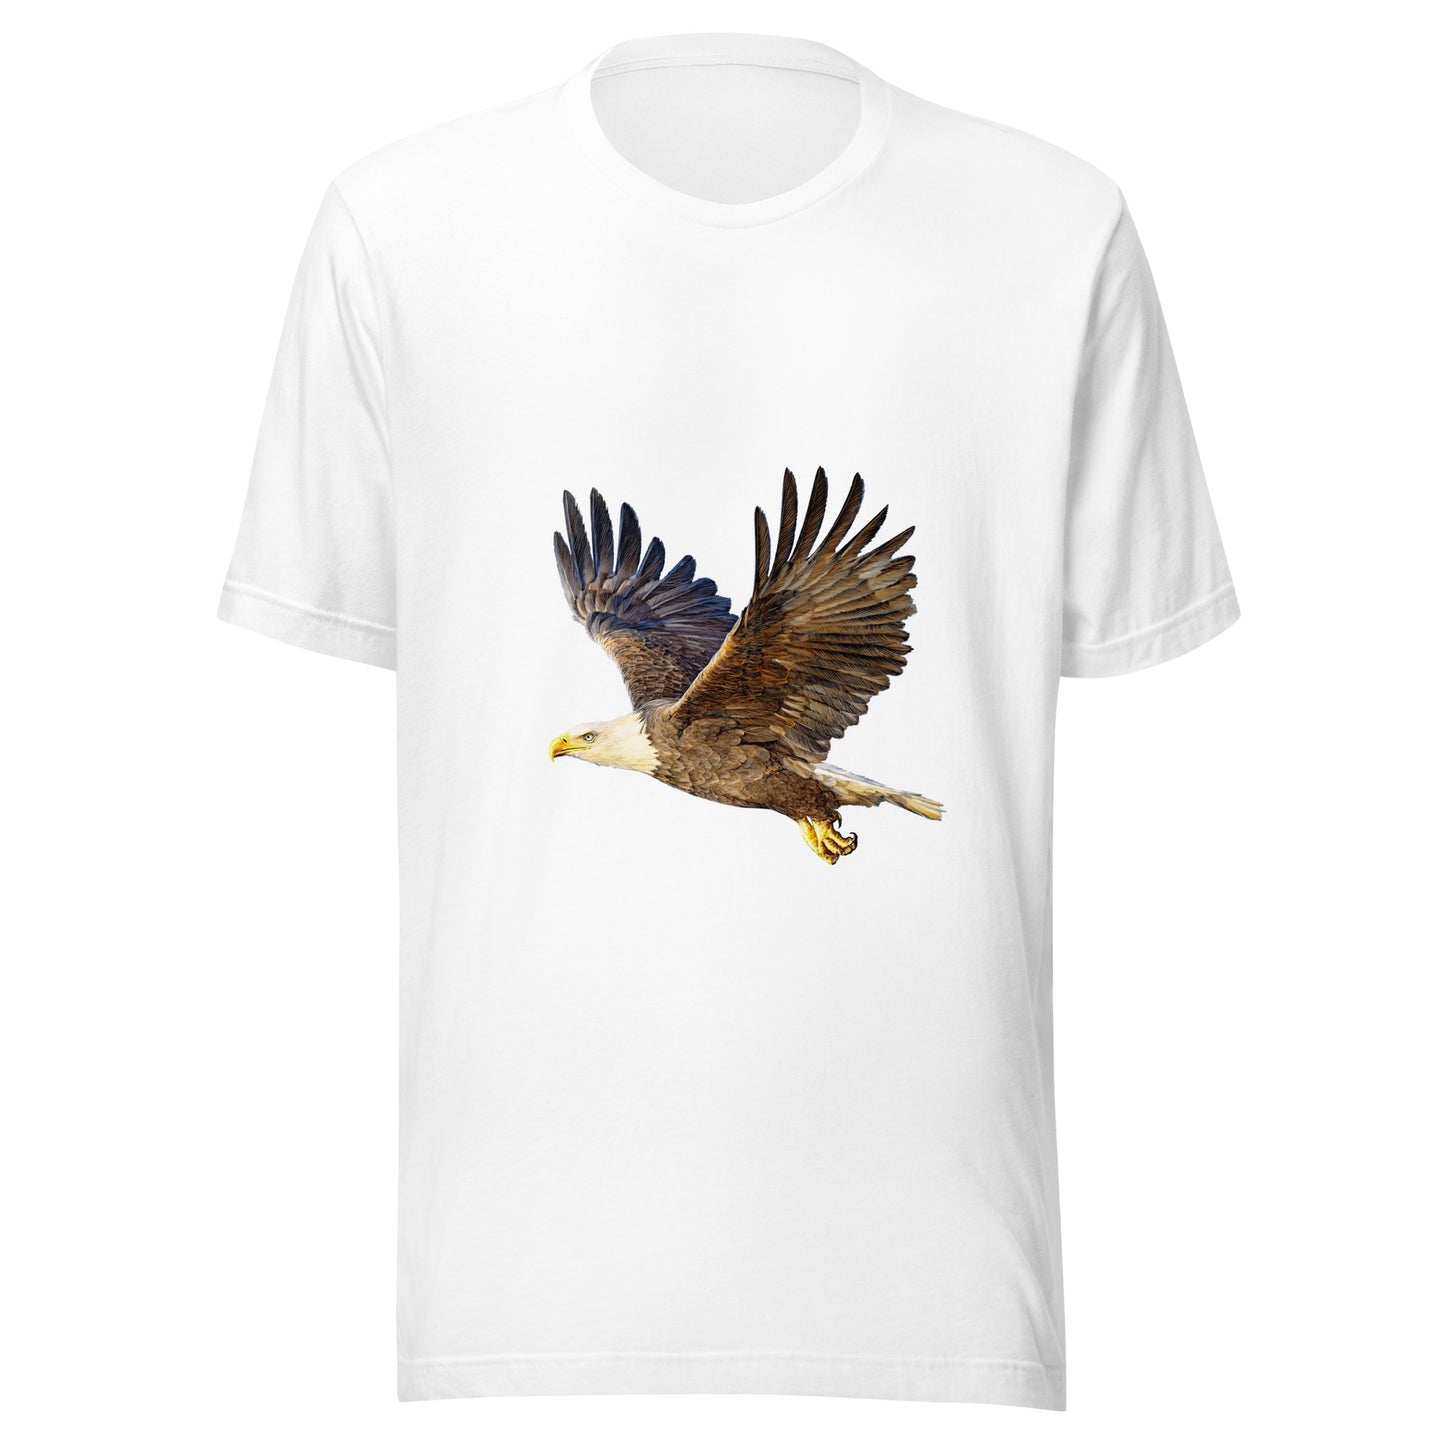 Women and Men's (Unisex) T-Shirt Printed with a Bald Eagle in Flight